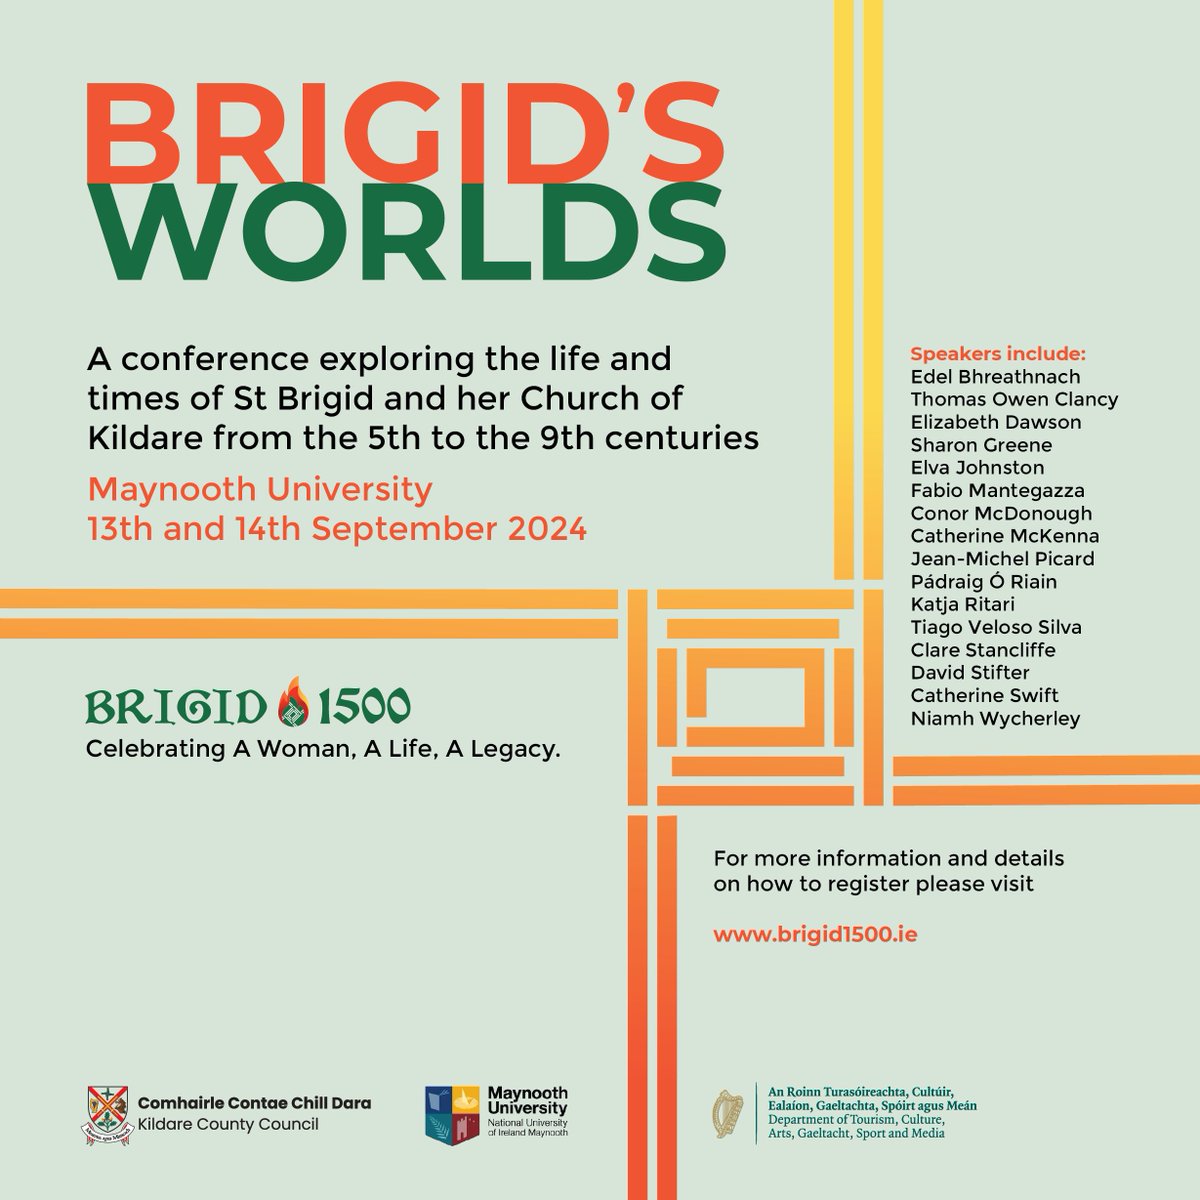 Join us at Maynooth University on September 13th &14th, for #BrigidsWorldsConference2024 Dive into the historical origins of arguably the most famous woman in Irish history, alongside leading academic experts. Visit brigid1500.ie for registration and further details